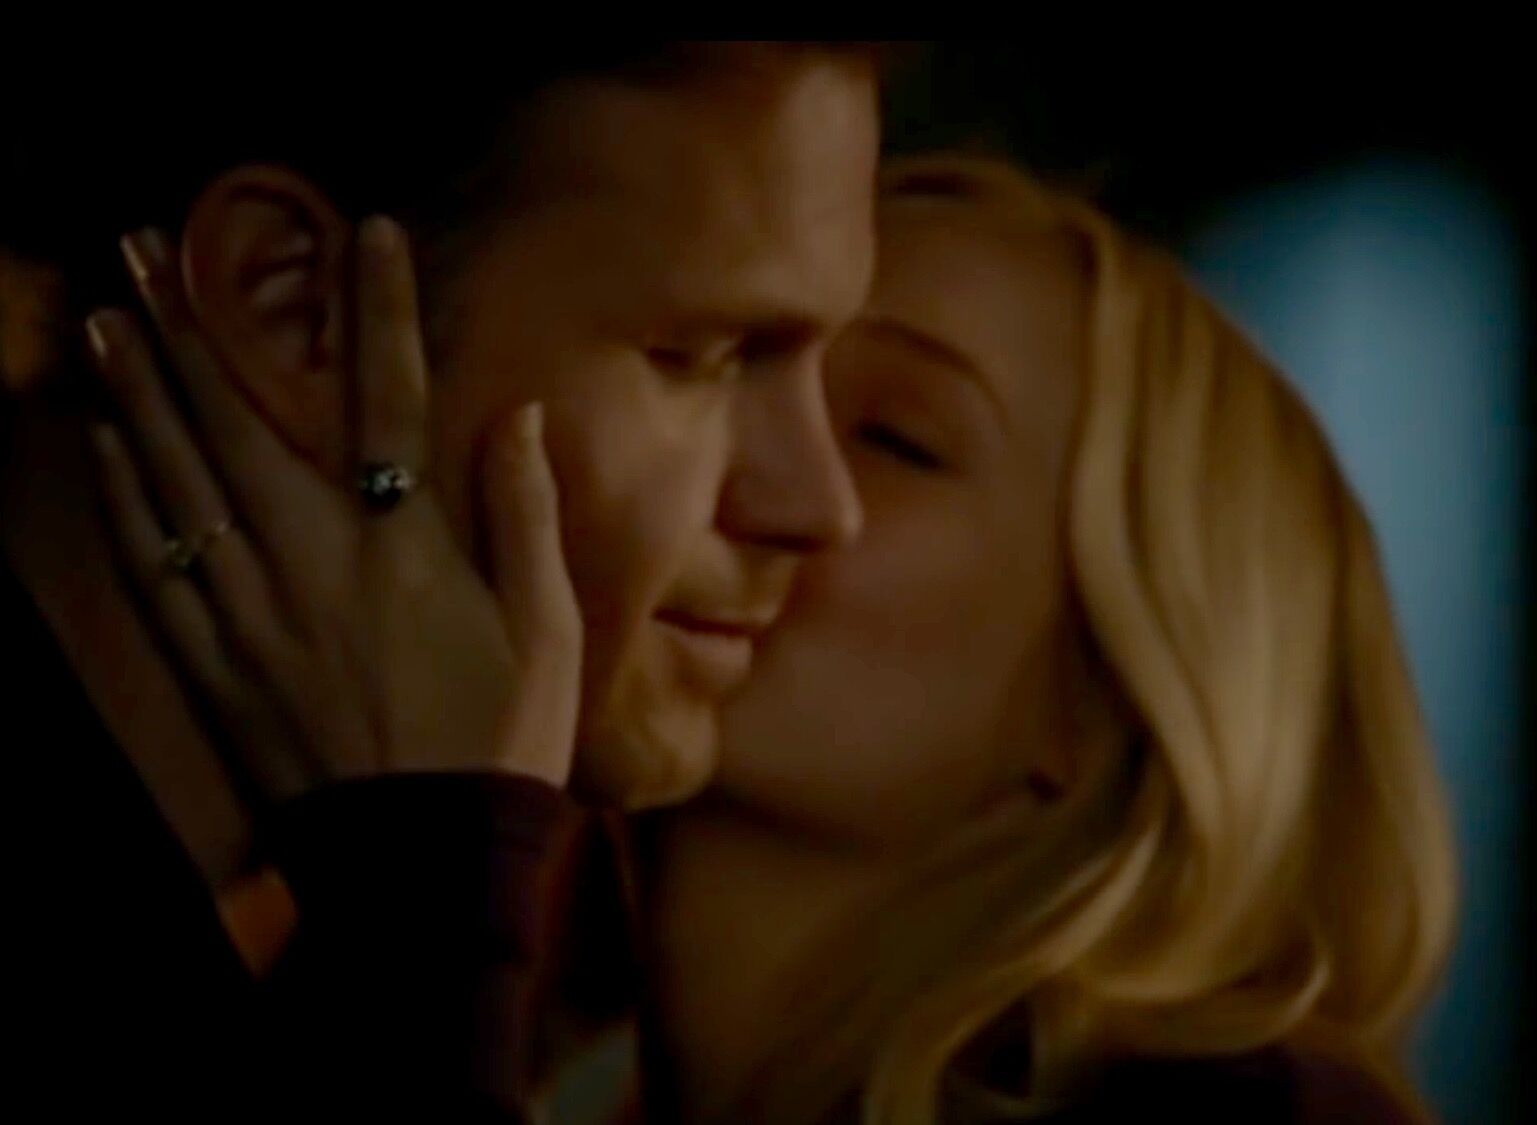 ▻ The story of Alaric and Caroline